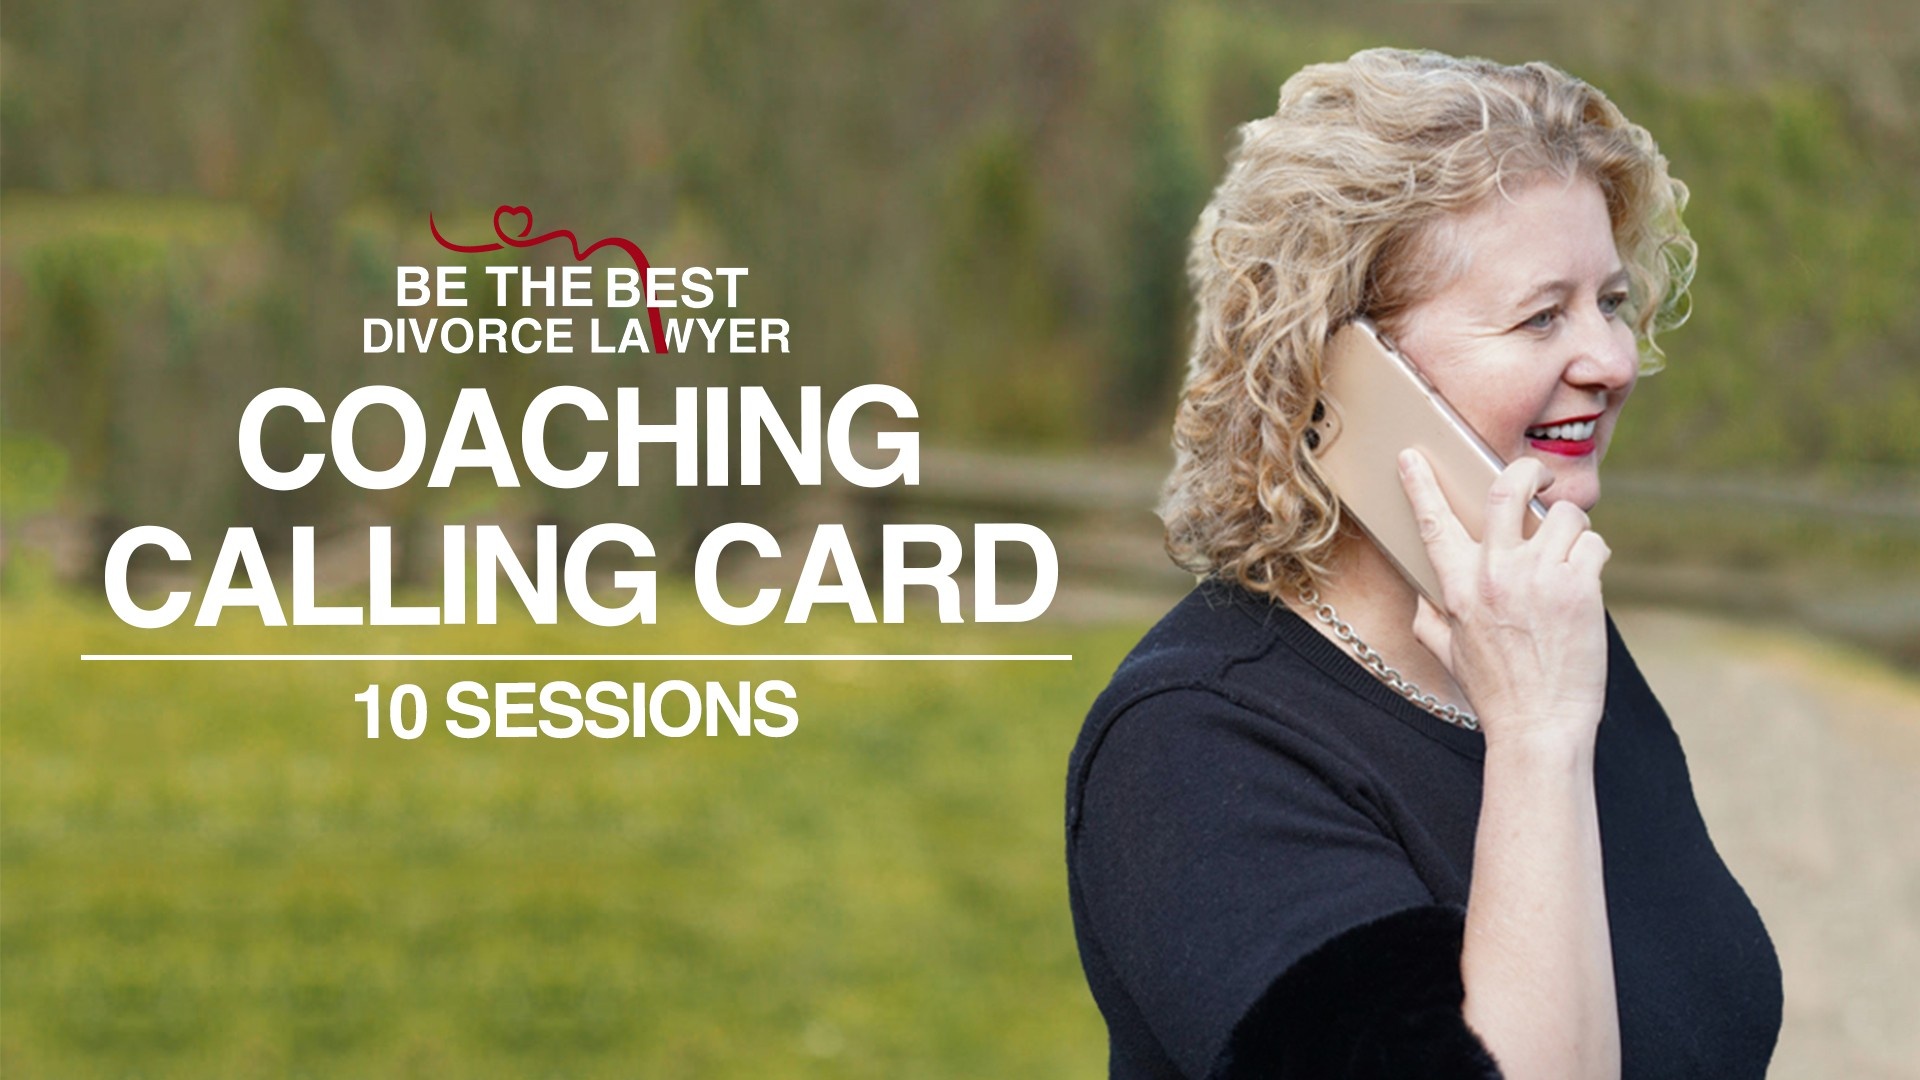 Work With Val Hemminger - Coaching Calling Card: 10 Sessions